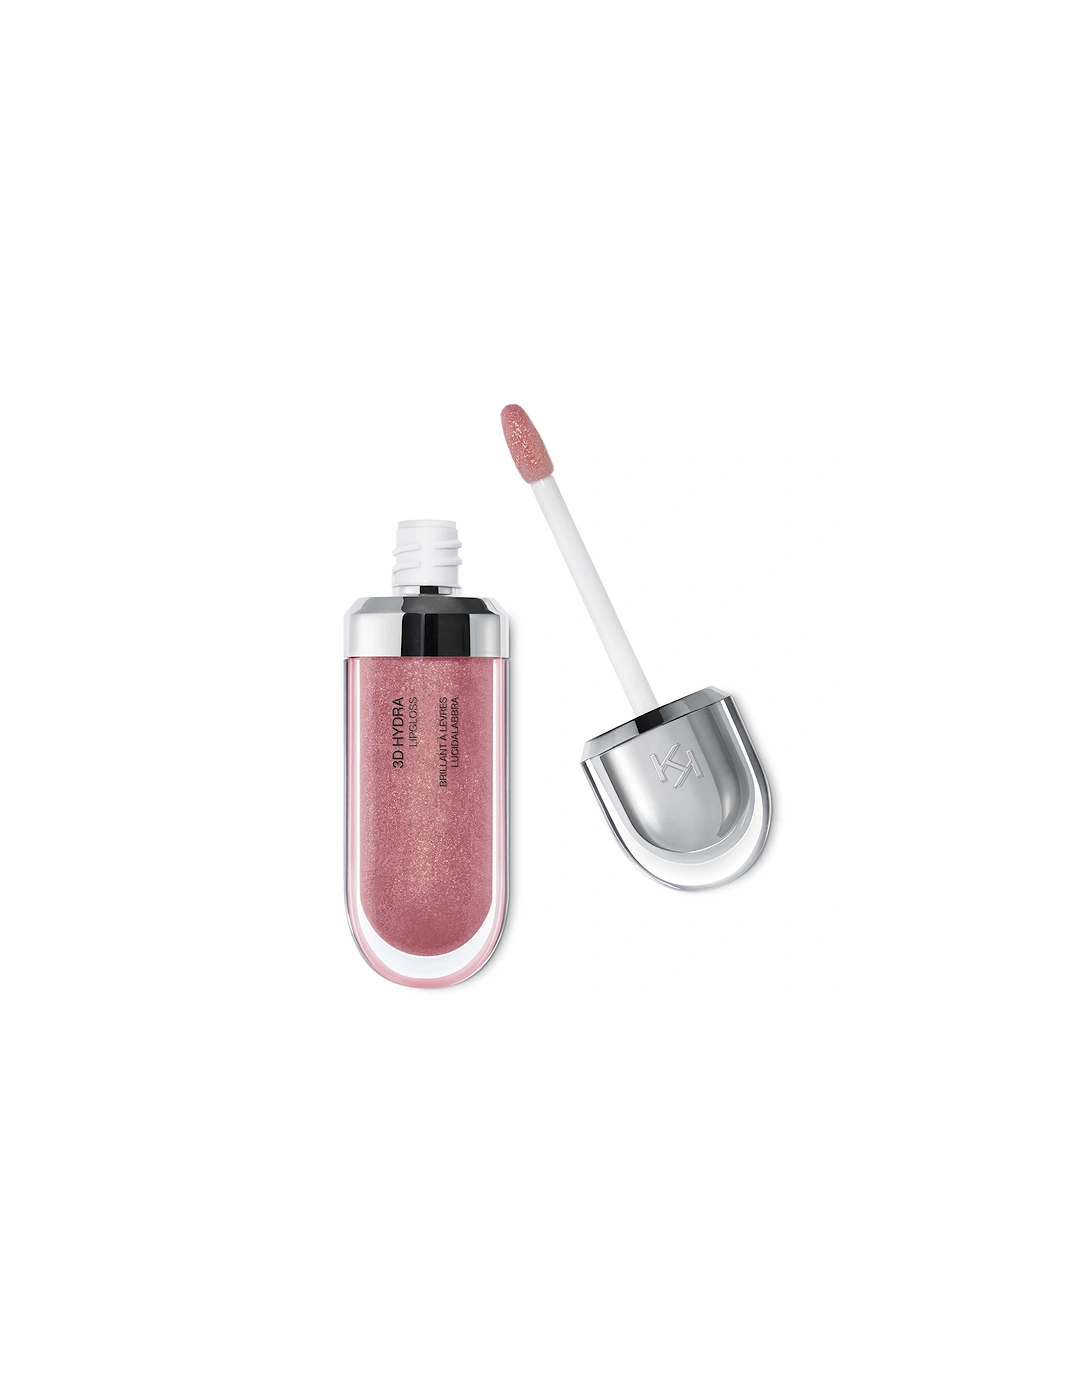 3D Hydra Lipgloss 6.5ml - 17 Pearly Mauve, 2 of 1